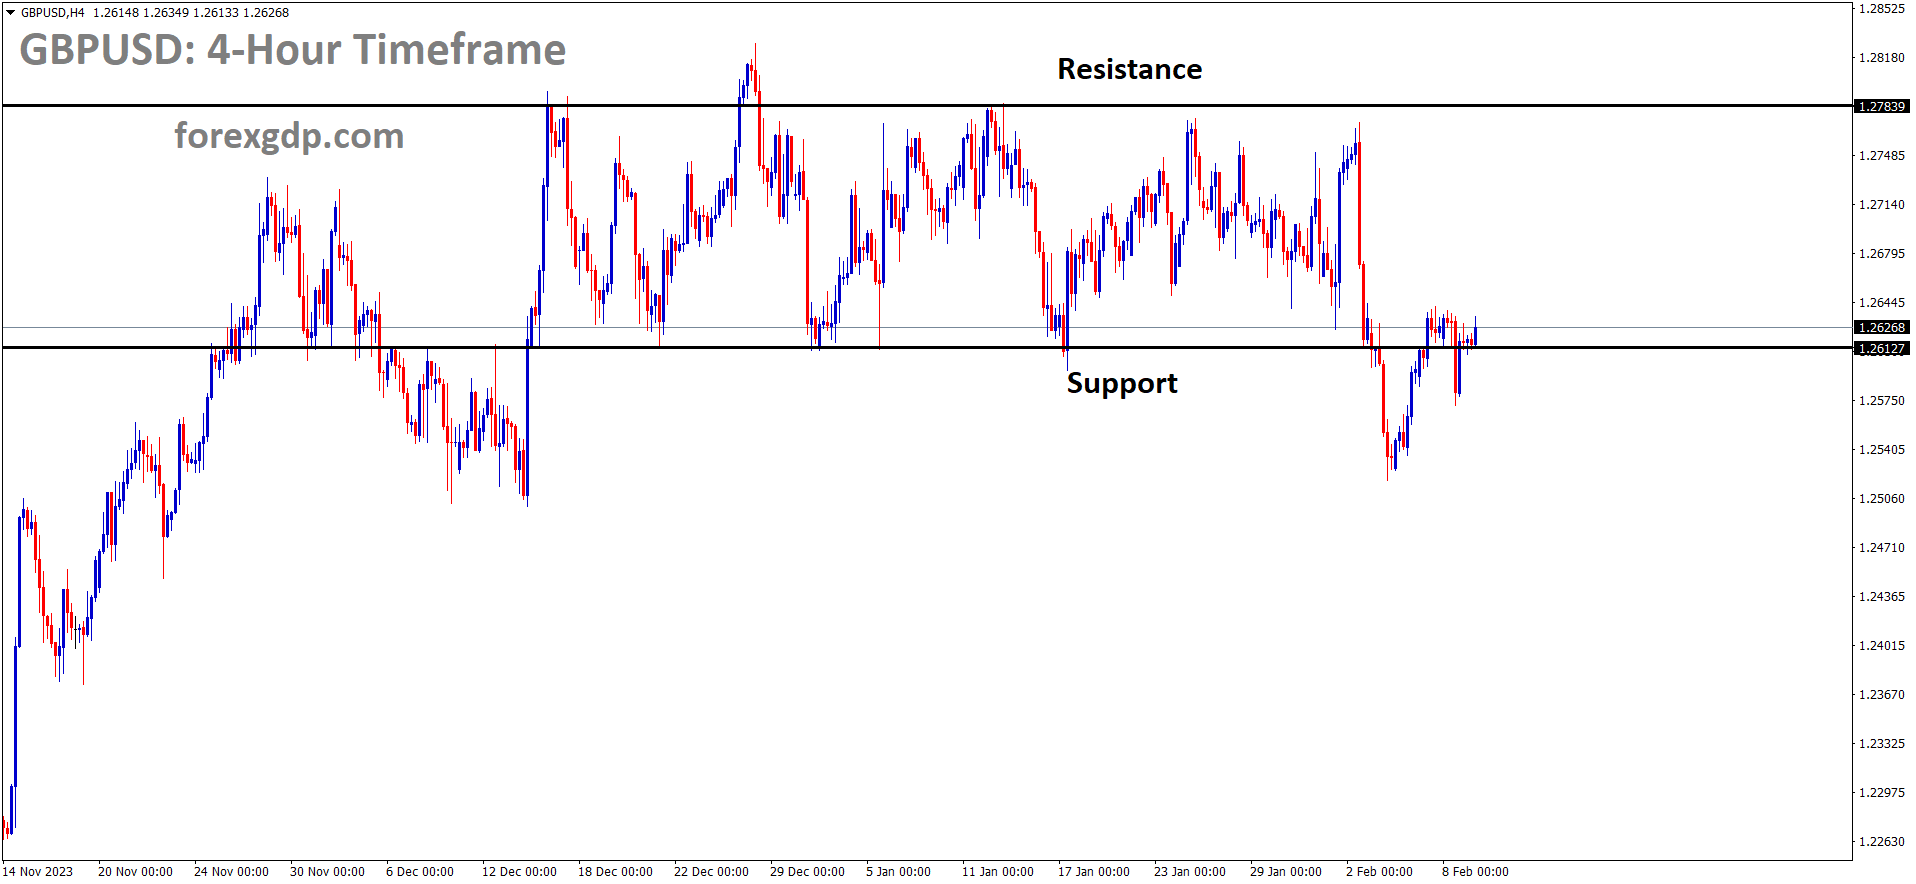 GBPUSD is moving in the Box pattern and the market has rebounded from the support area of the pattern